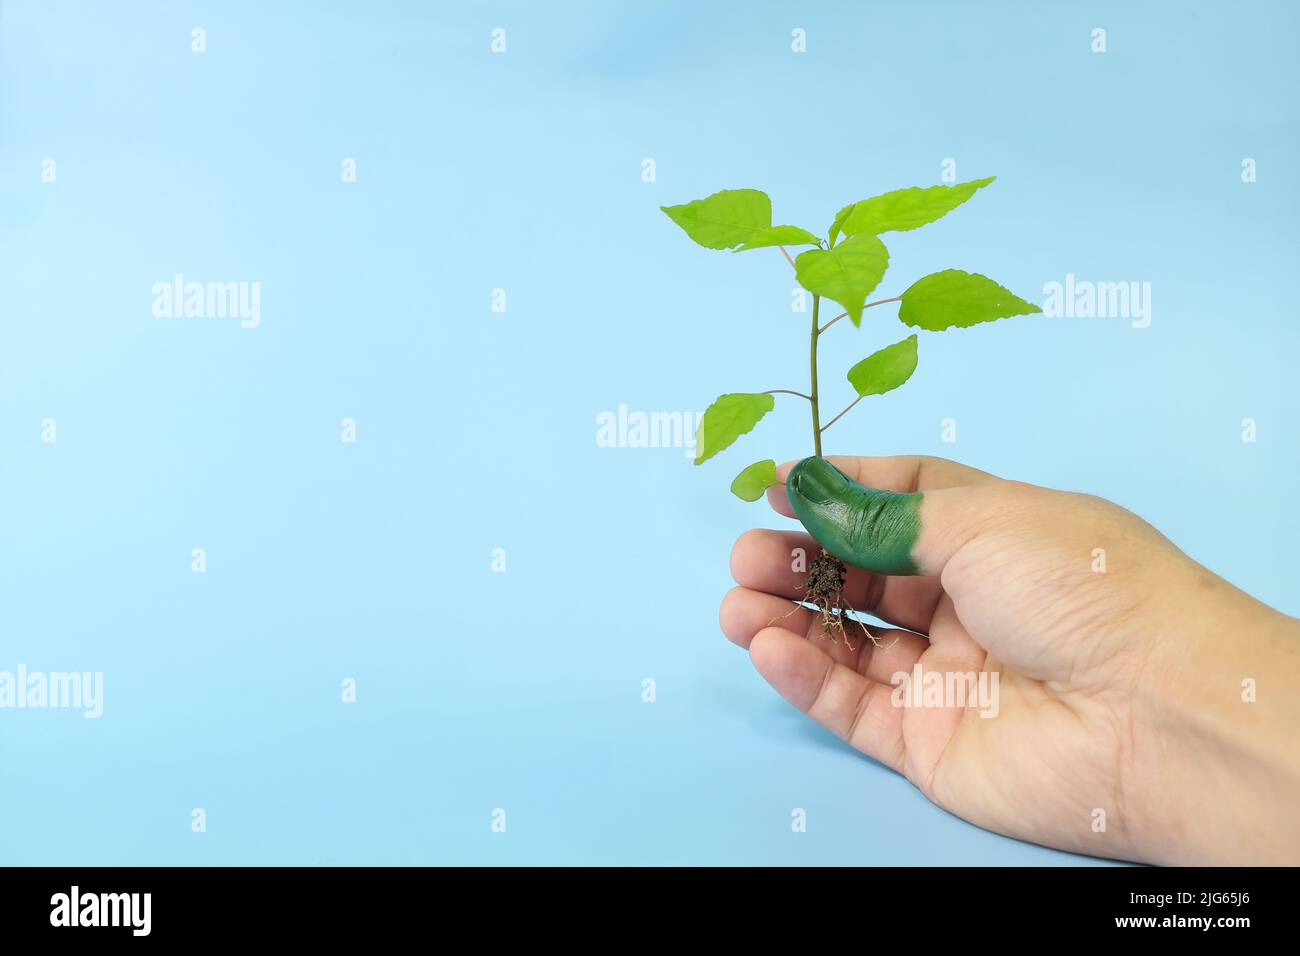 Green thumb and environmentalist concept. Human hand holding a plant seedling with thumb painted with color green. Stock Photo